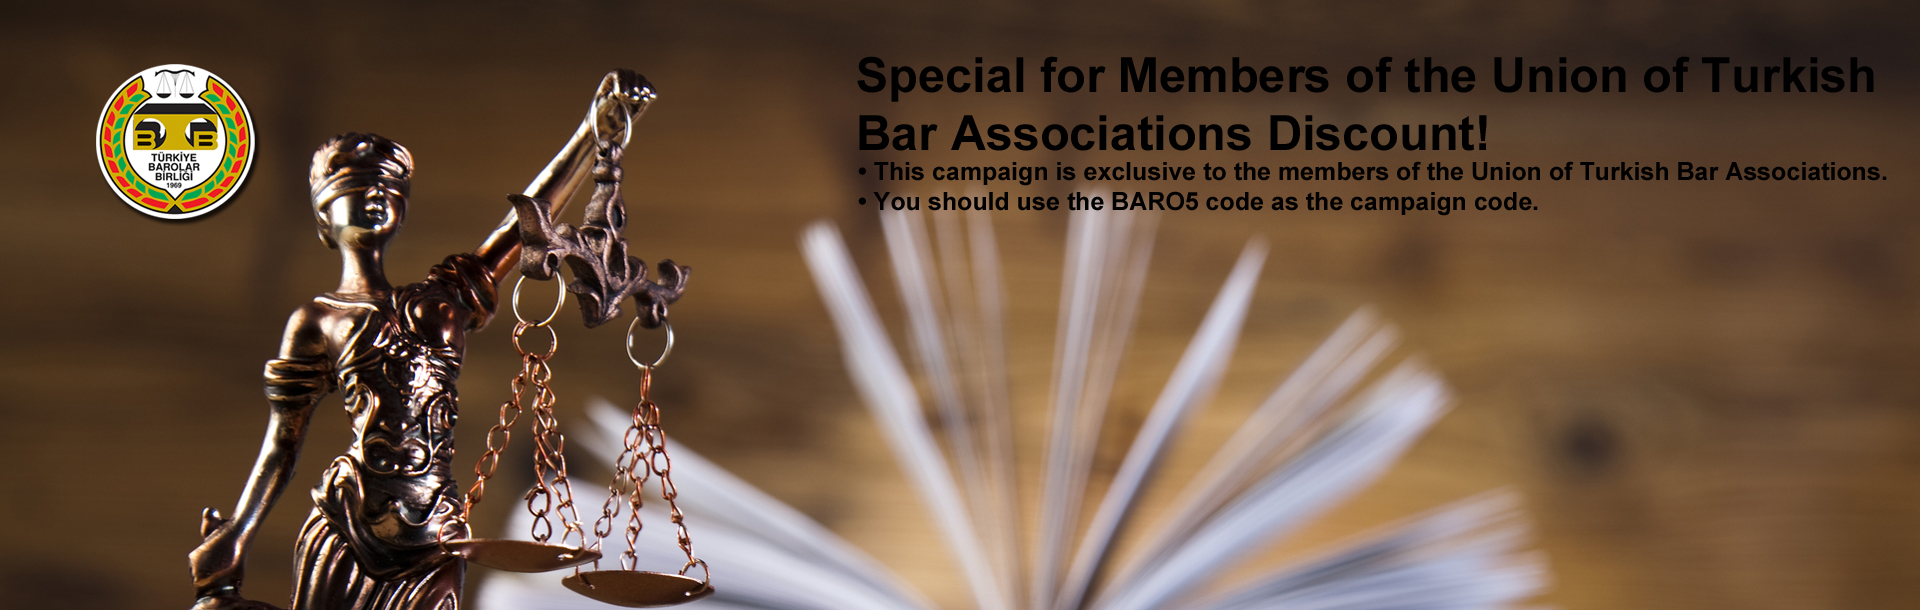 Special for Members of the Union of Turkish Bar Associations Discount!